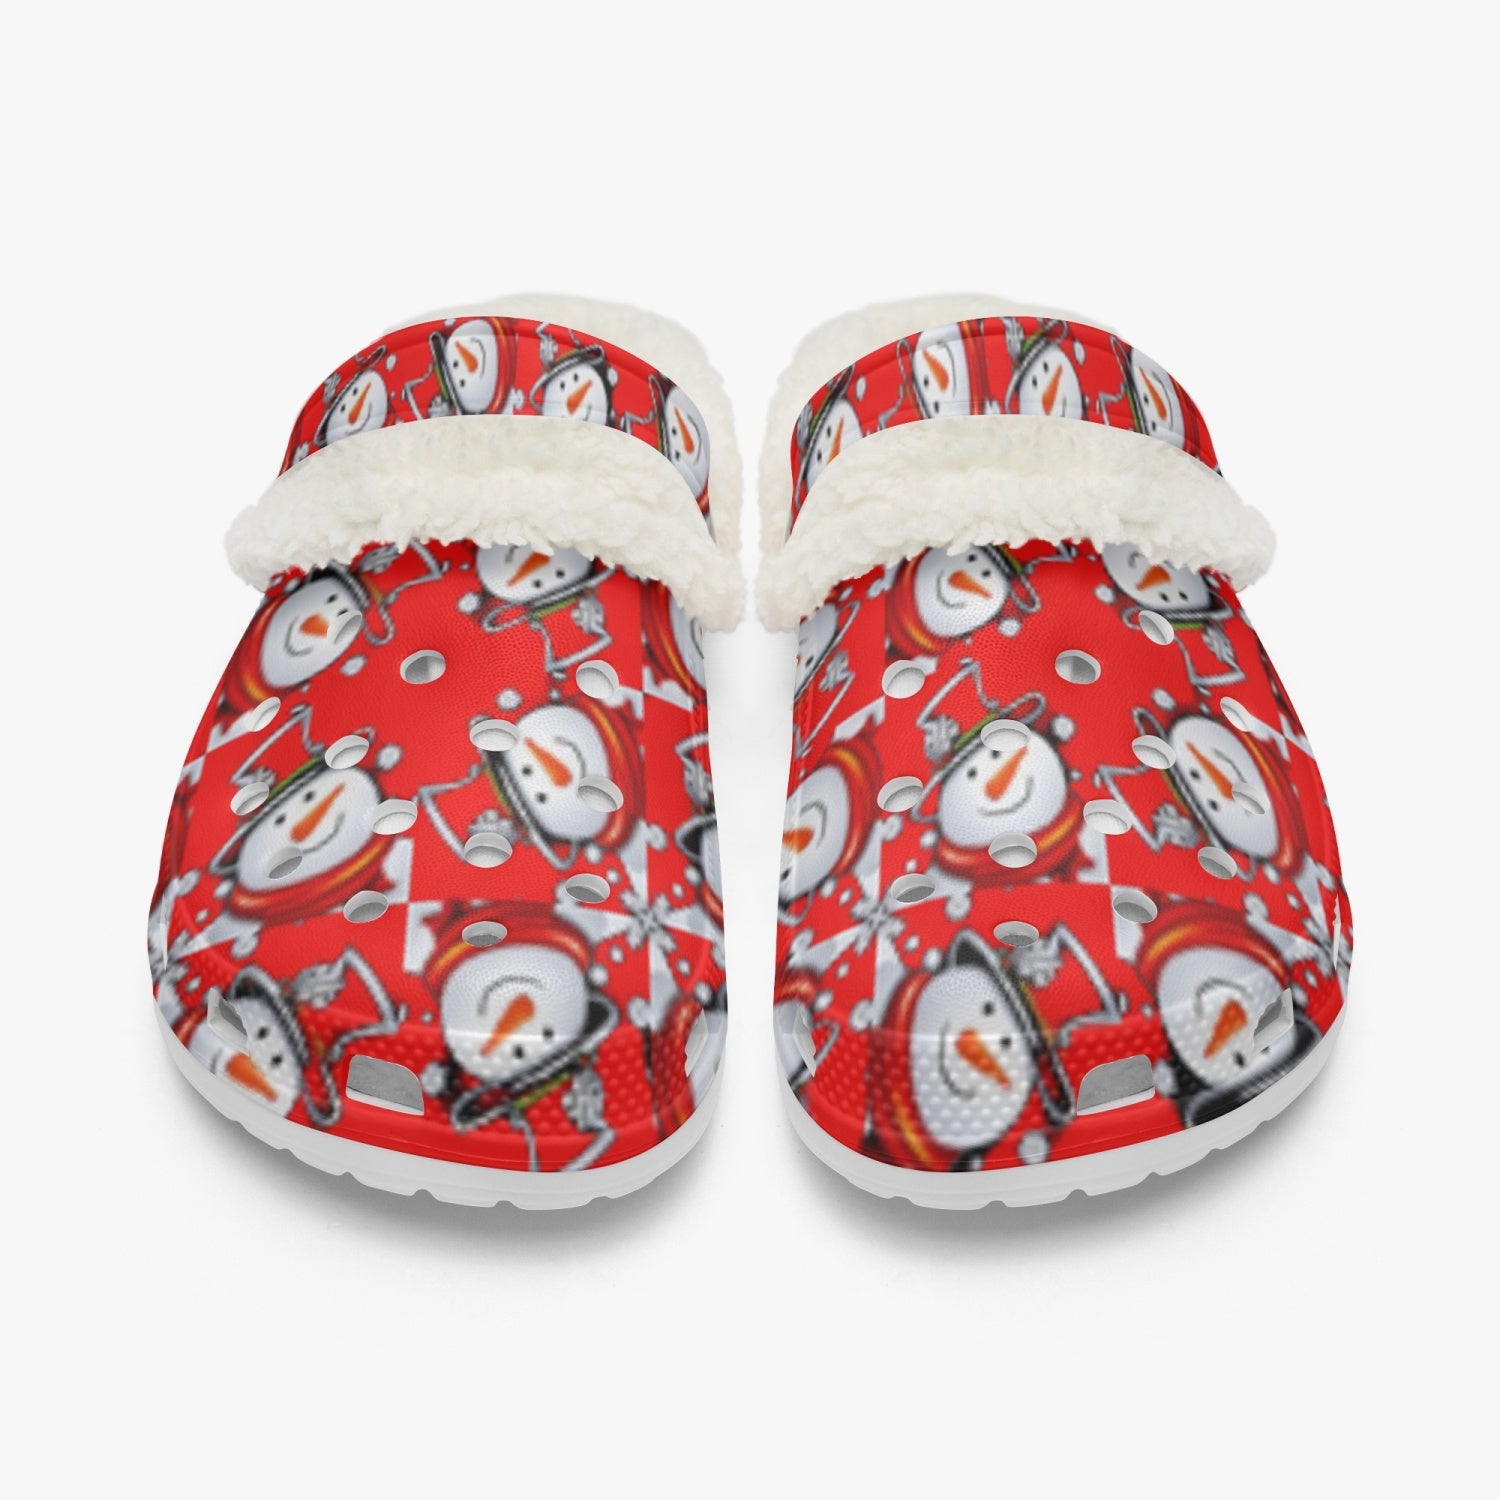 White - Snow Man's Delight Fuzzy Lined Christmas Clogs - 2 colors - womens clogs at TFC&H Co.